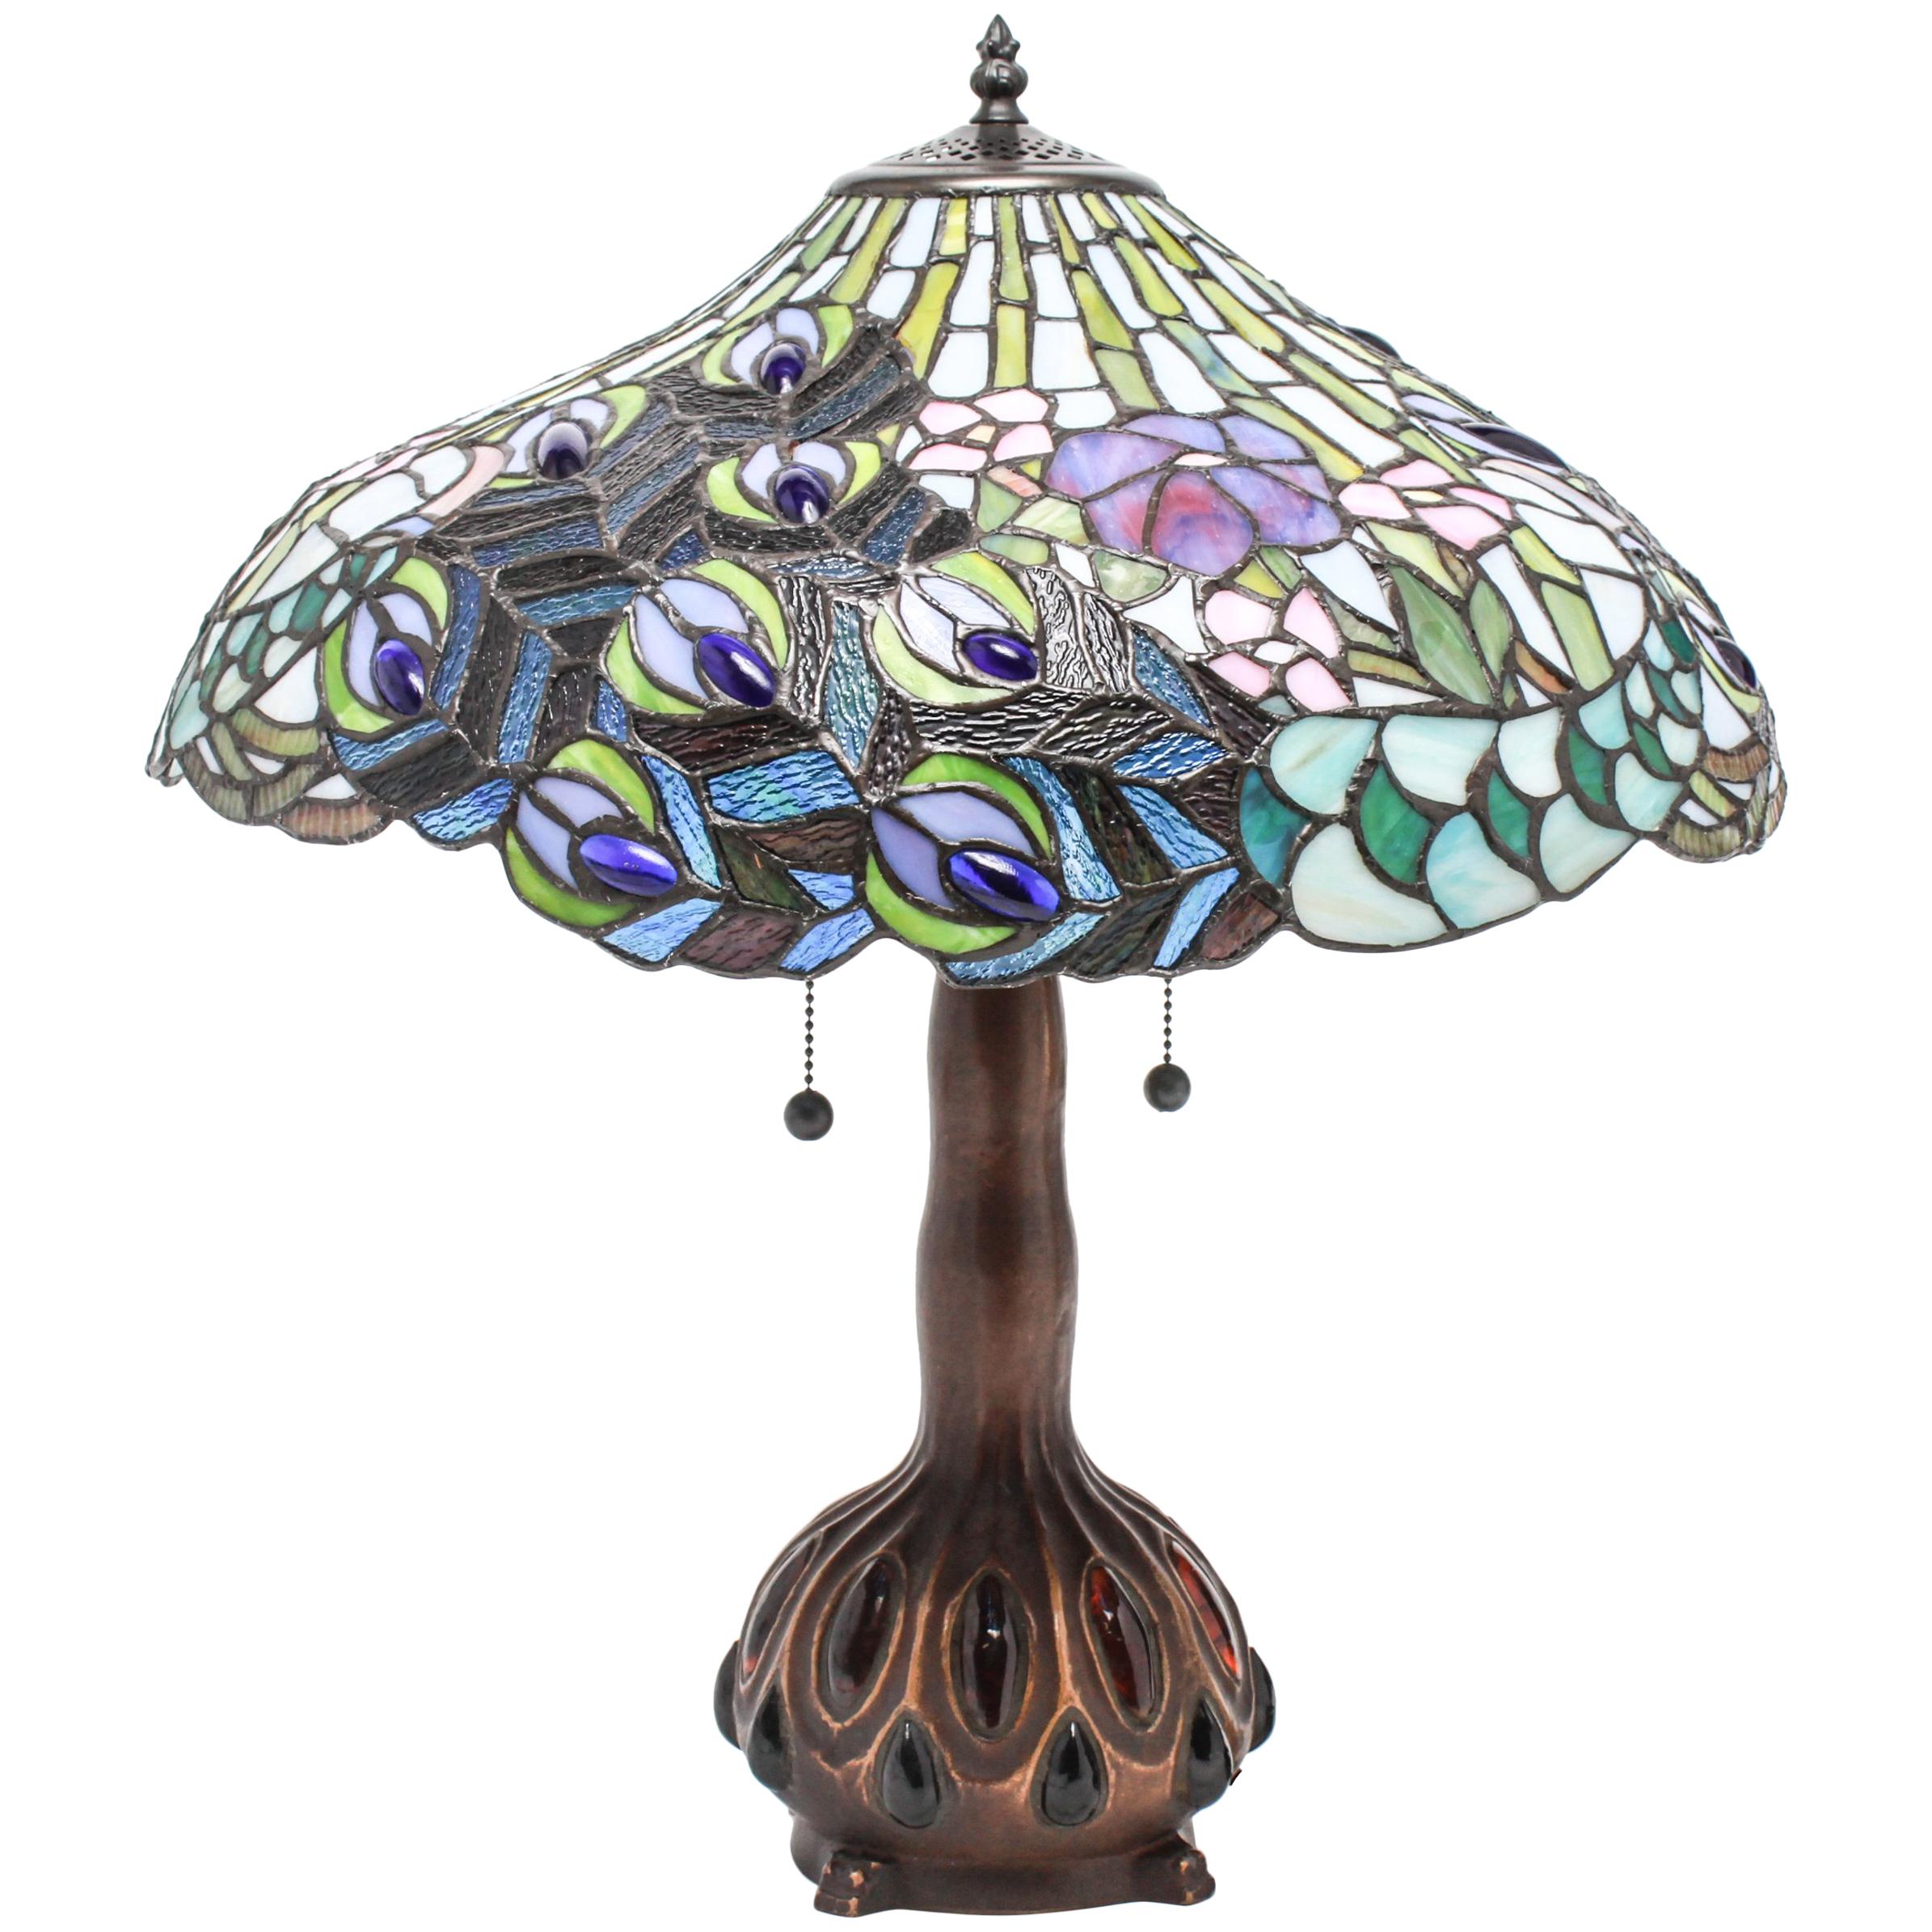 Tiffany Style American Art Nouveau Stained Glass Peacock Feather Table Lamp